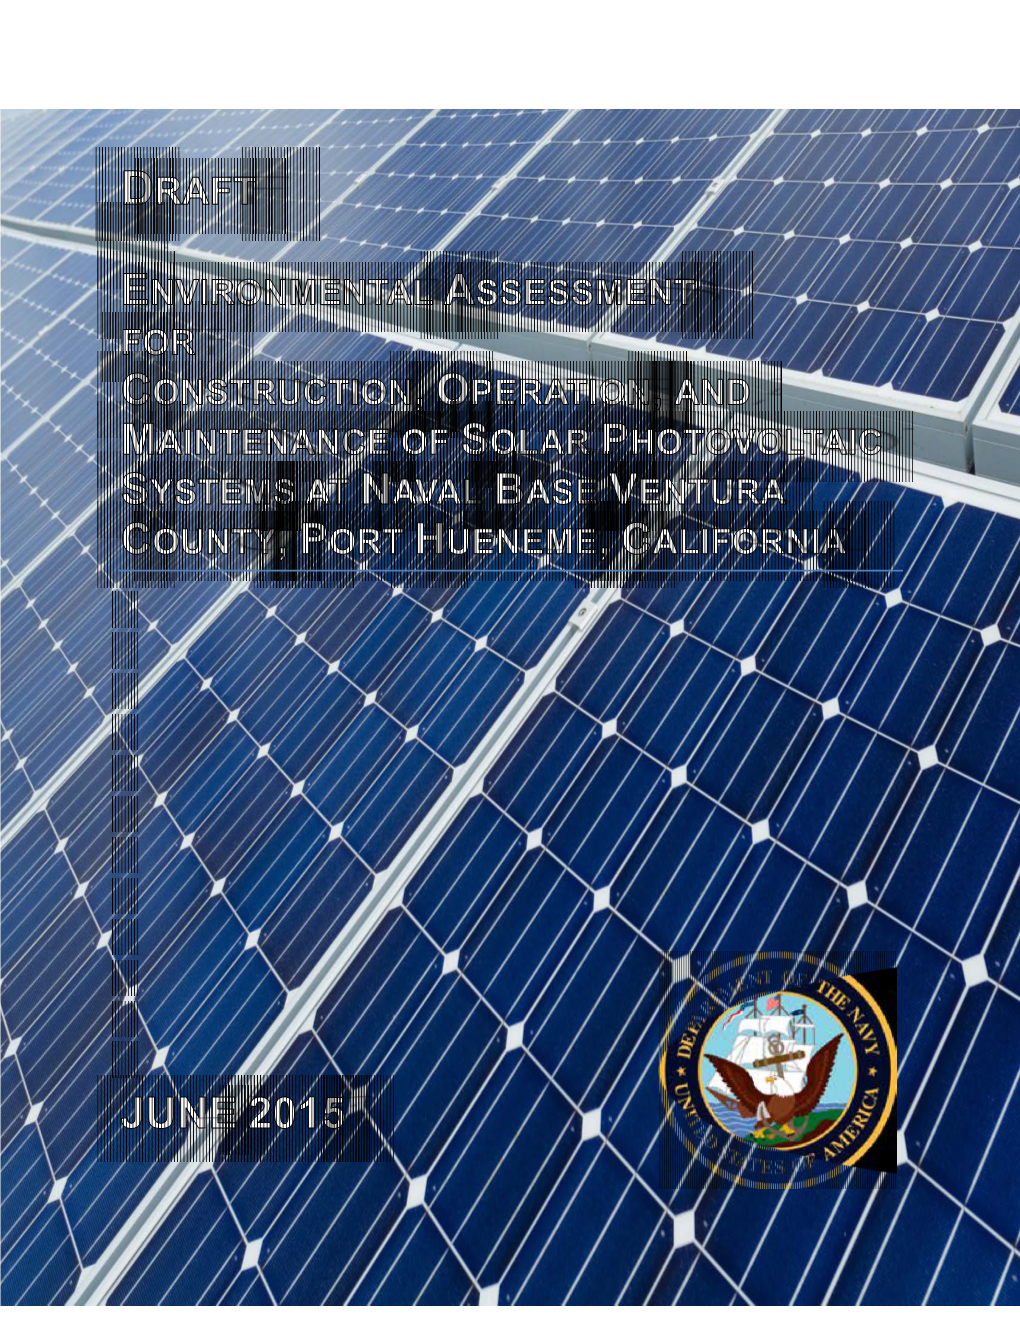 Environmental Assessment for Construction, Operation, and Maintenance of Solar Photovoltaic Systems at Naval Base Ventura County Port Hueneme, California